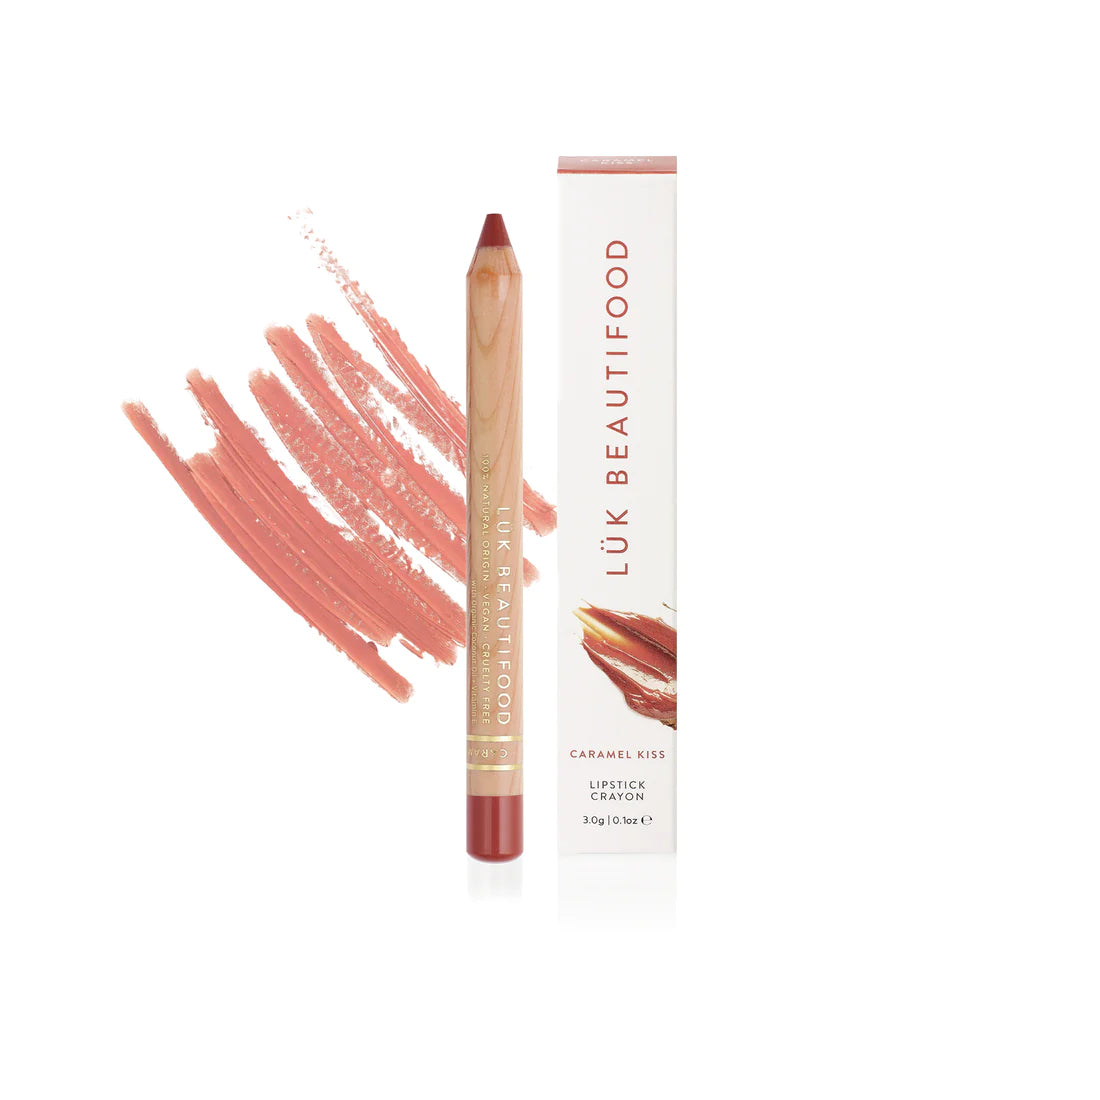 Natural Lipstick Crayon in Lychee Sorbet